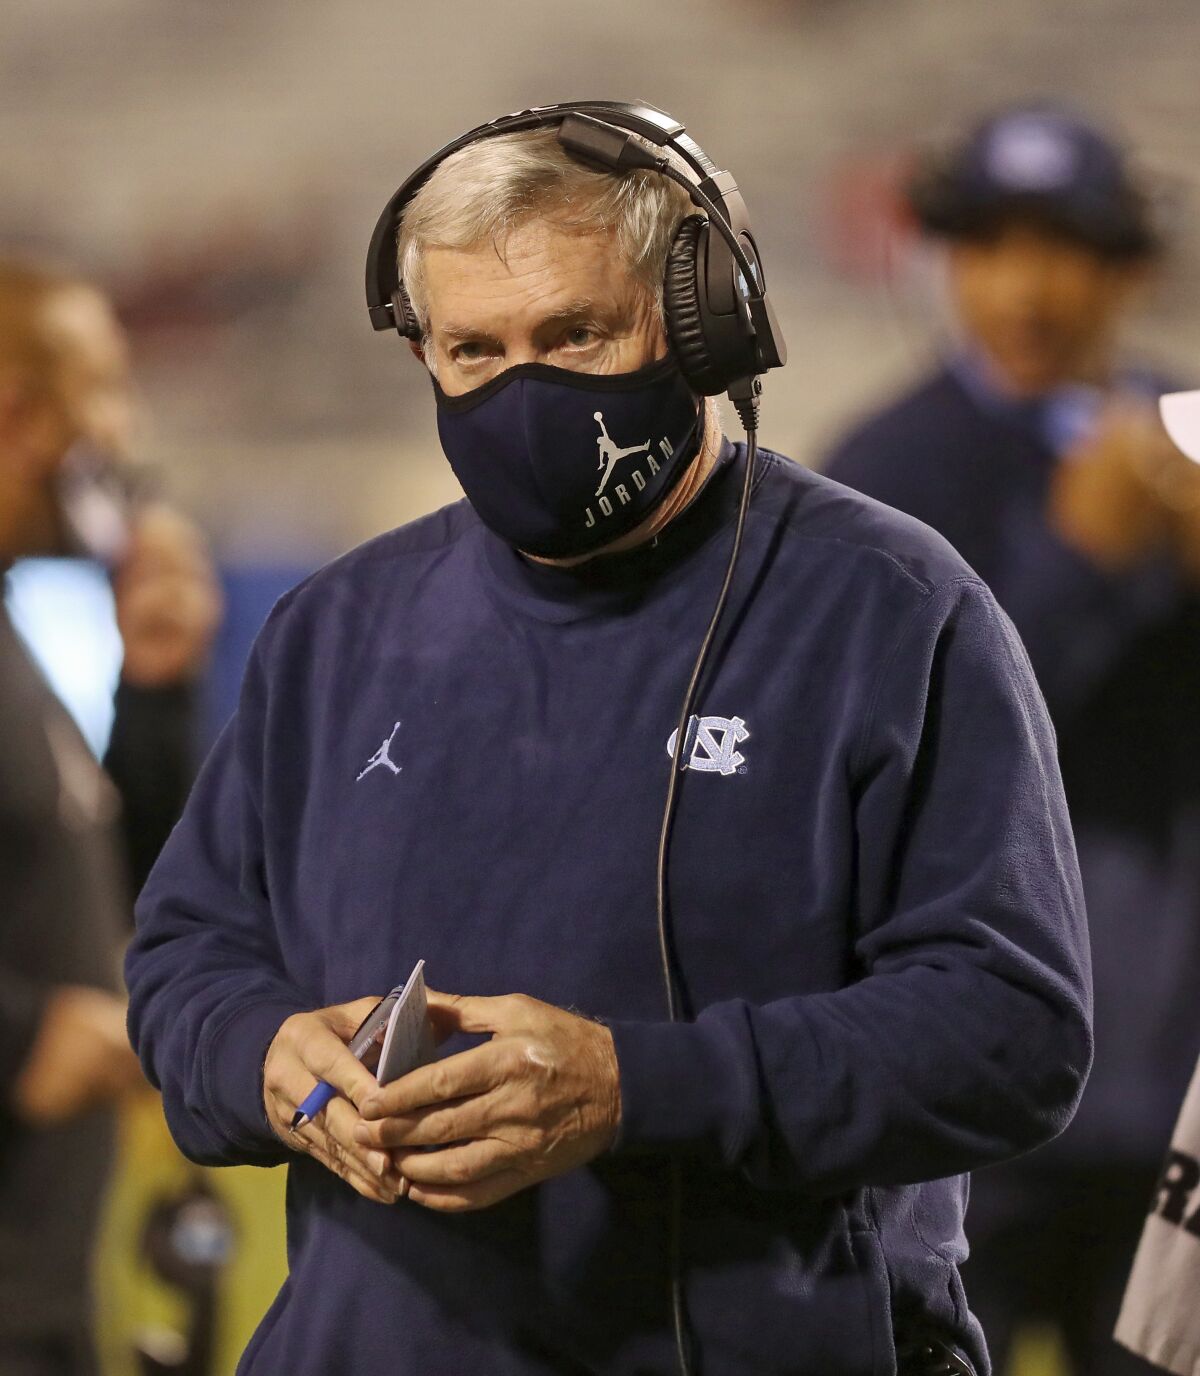 FILE - In this Oct. 31, 2020, file photo, North Carolina coach Mack Brown watches a play during the team's NCAA college football game against Virginia, in Charlottesville, Va. The ACC hosted a Mental Health and Wellness Summit in 2019 in Durham, North Carolina. A second one was planned for last May before being scuttled by the pandemic. “Many years ago, we didn't say much about it (mental health) at all,” North Carolina coach Mack Brown said. Now, it's a frequent topic. (Andrew Shurtleff/The Daily Progress via AP, File)